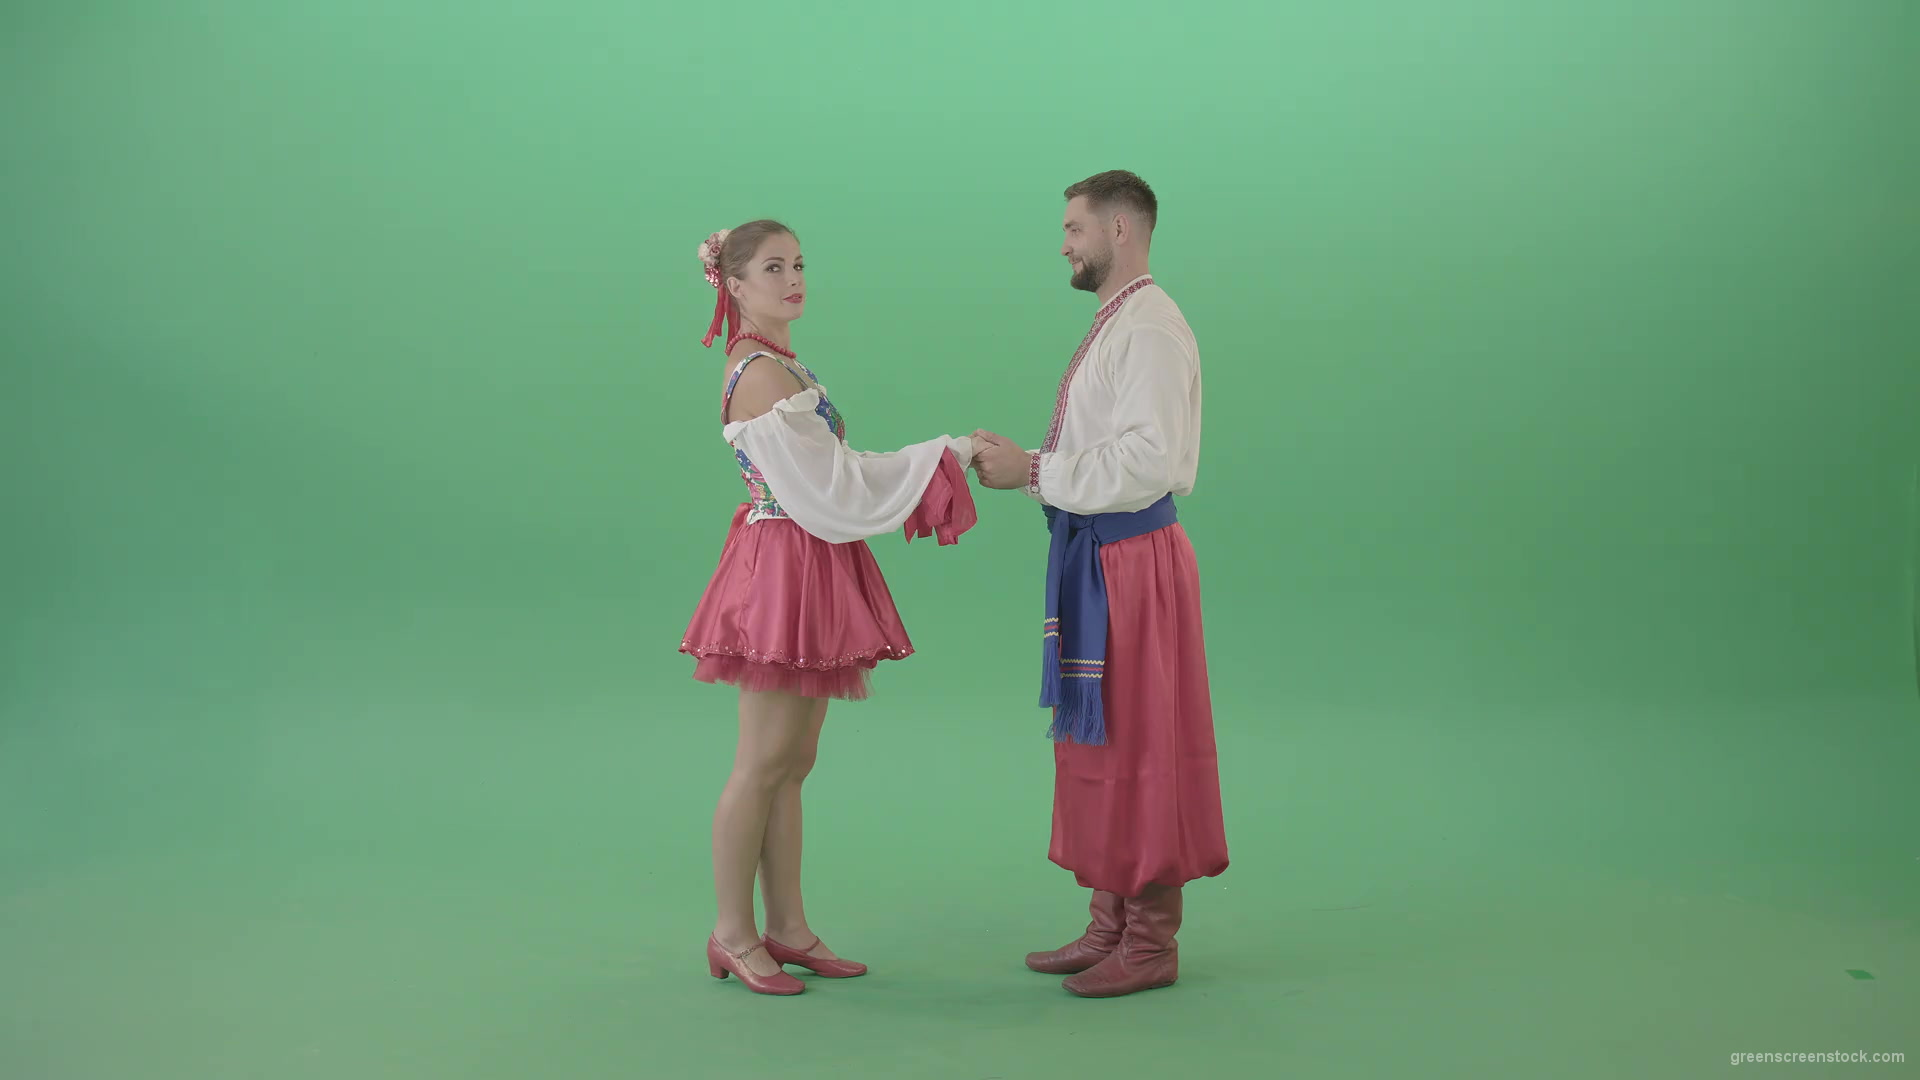 Beautiful-Ukrainian-couple-speaking-about-love-in-ethno-costumes-isolated-on-green-screen-4K-Video-Footage-1920_001 Green Screen Stock